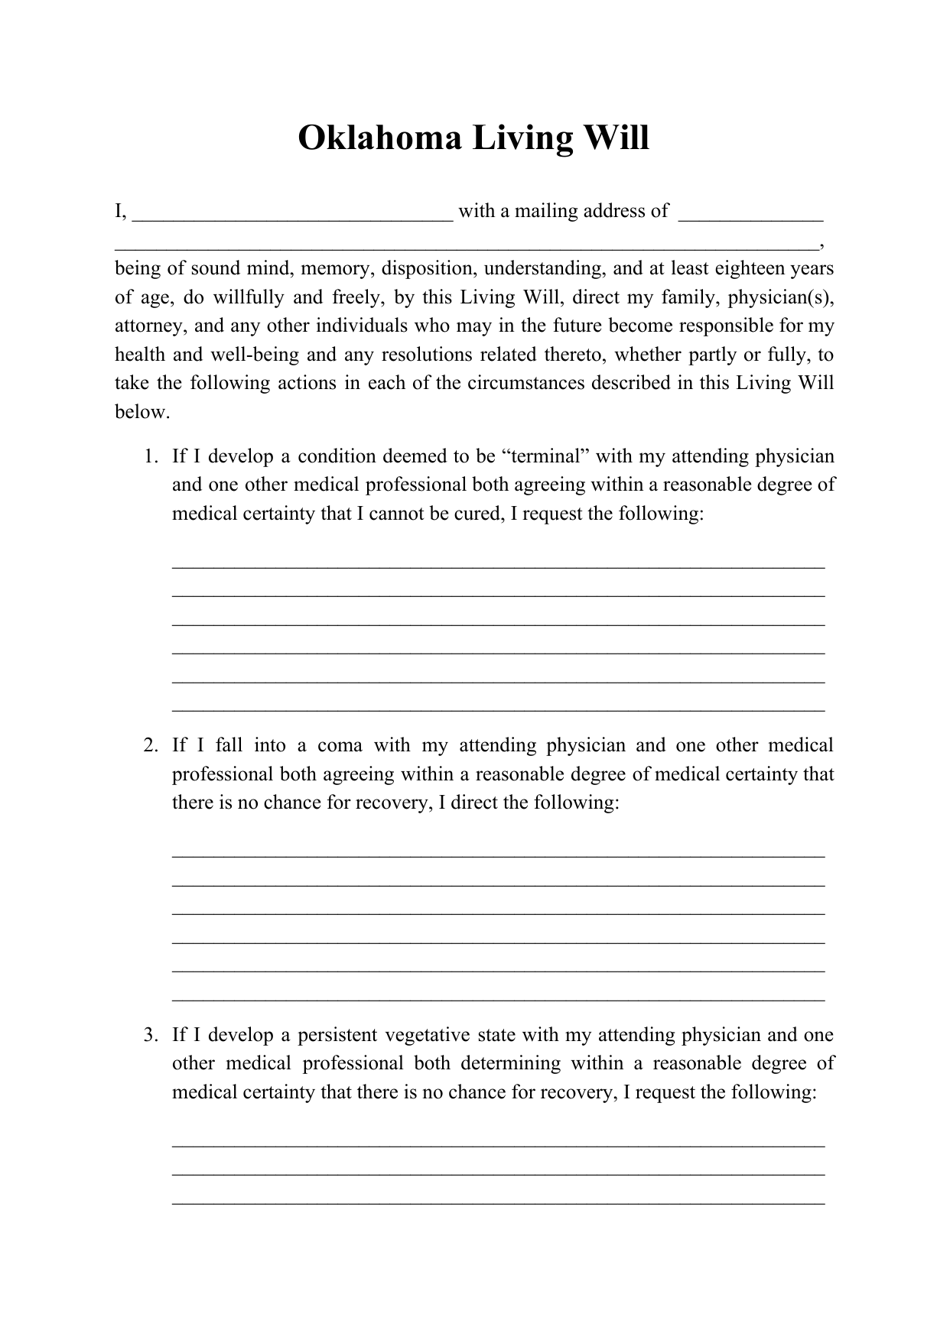 oklahoma-living-will-form-fill-out-sign-online-and-download-pdf